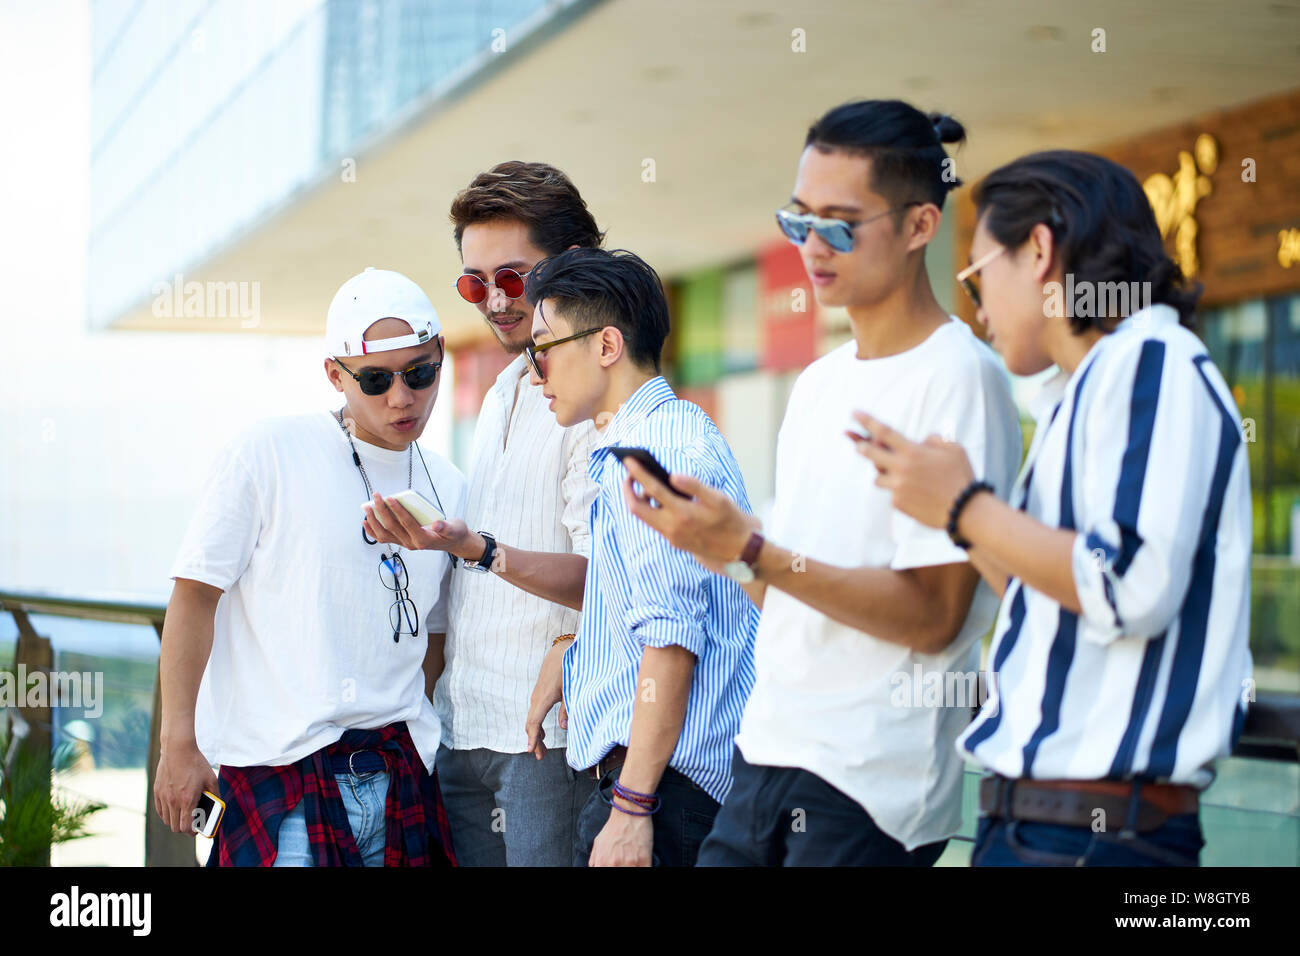 young asian adult men using social media looking at mobile phone together Stock Photo